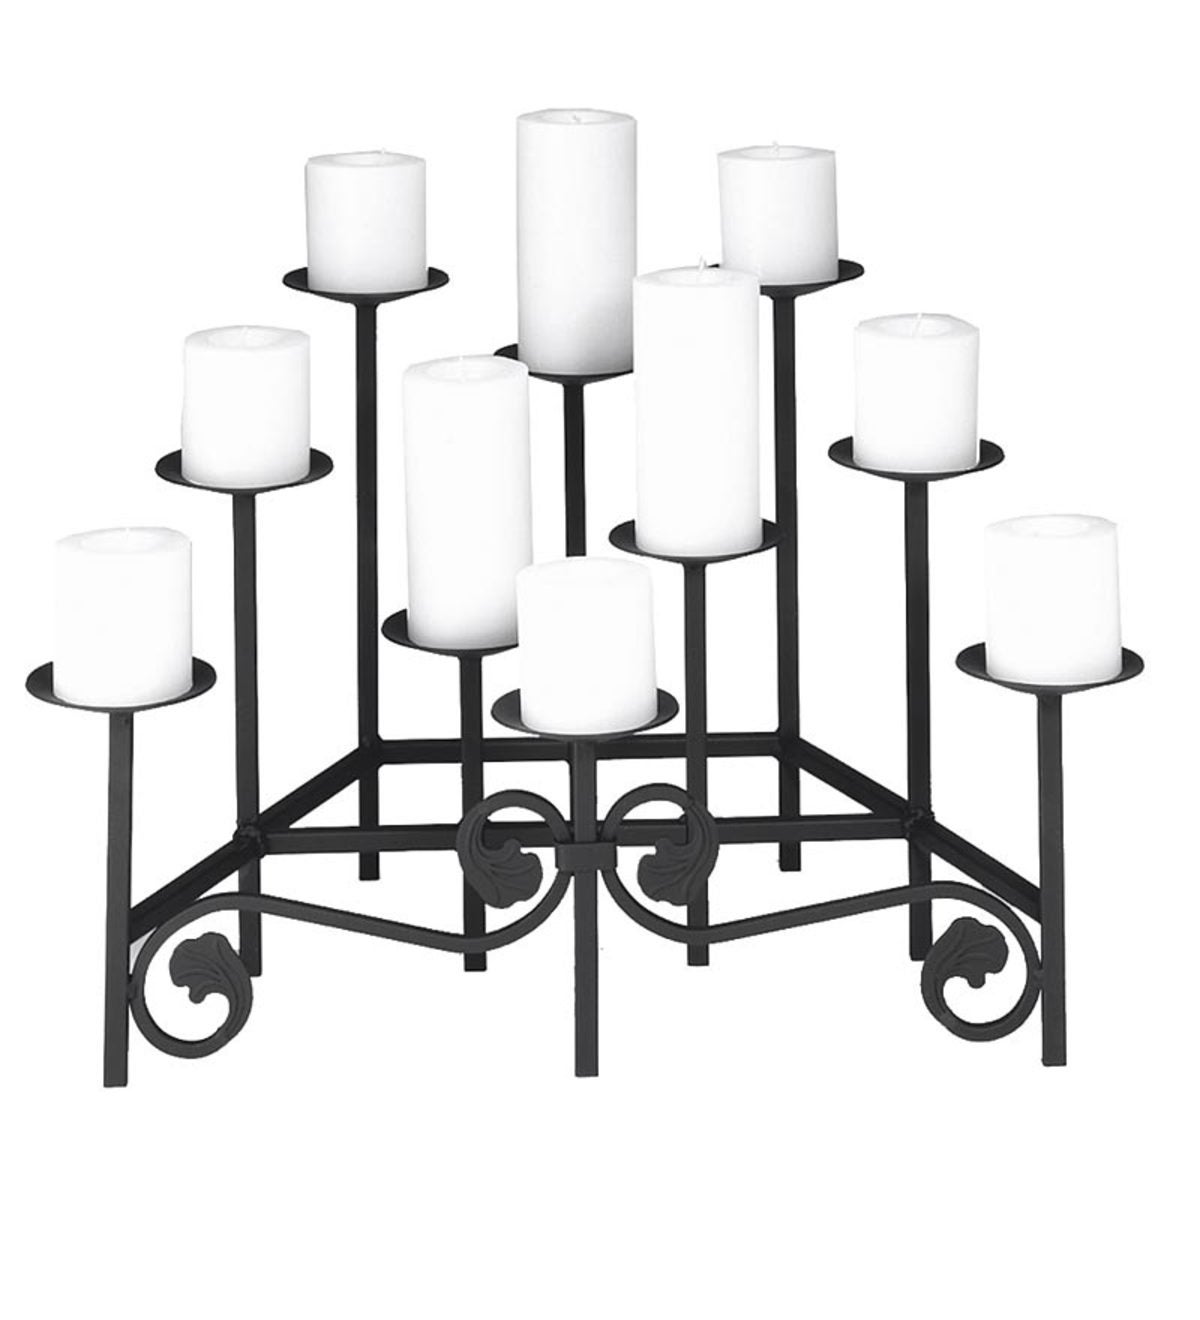 Iron Fireplace Candelabra with Ten Tiers